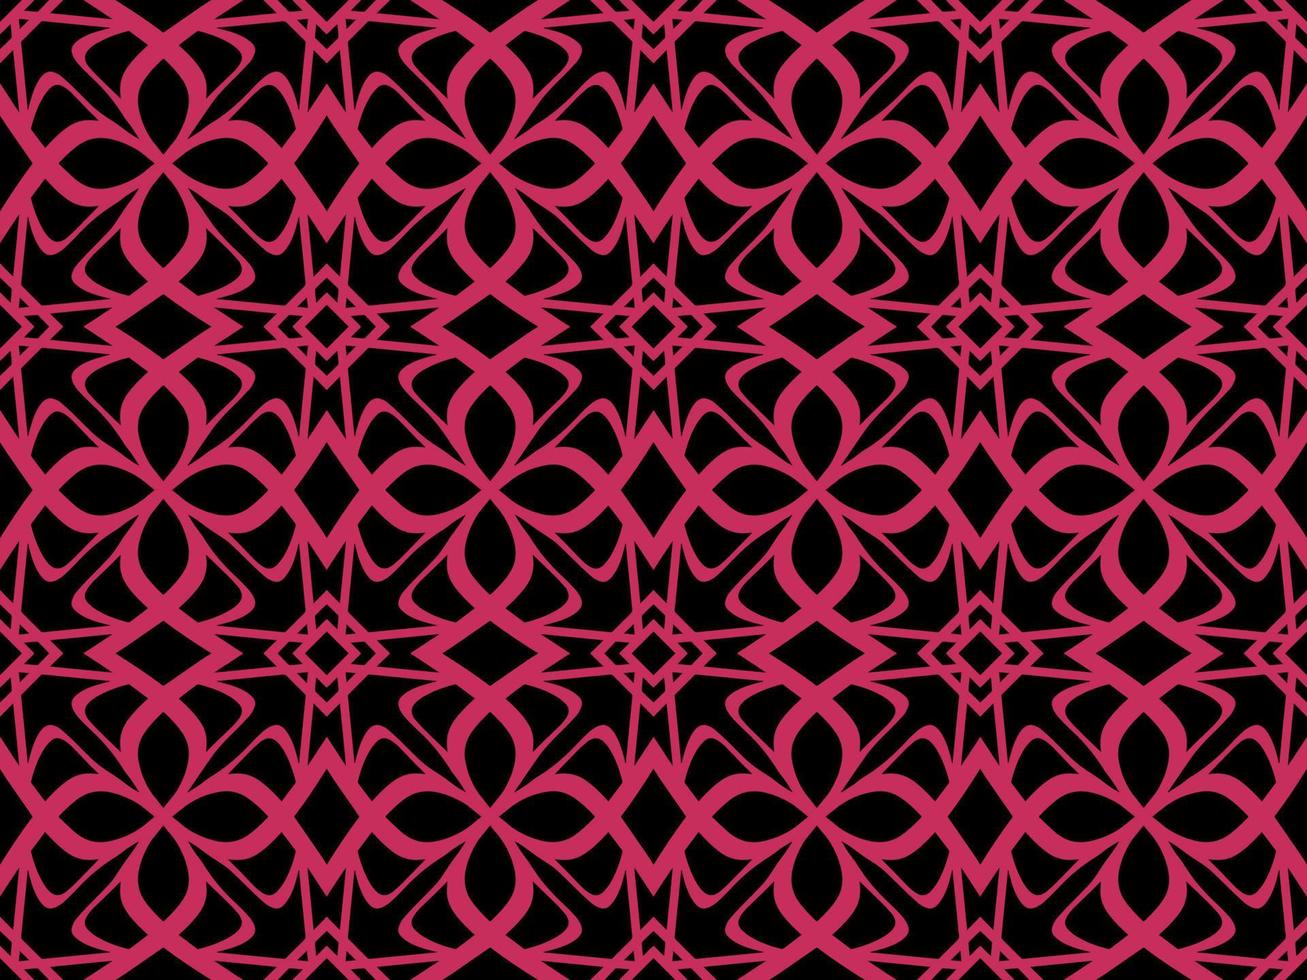 Pink Geometric Seamless Pattern with Tribal Shape. Pattern designed in Ikat, Aztec, Moroccan, Thai, Luxury Arabic Style. Ideal for Fabric Garment, Ceramics, Wallpaper. Vector Illustration.